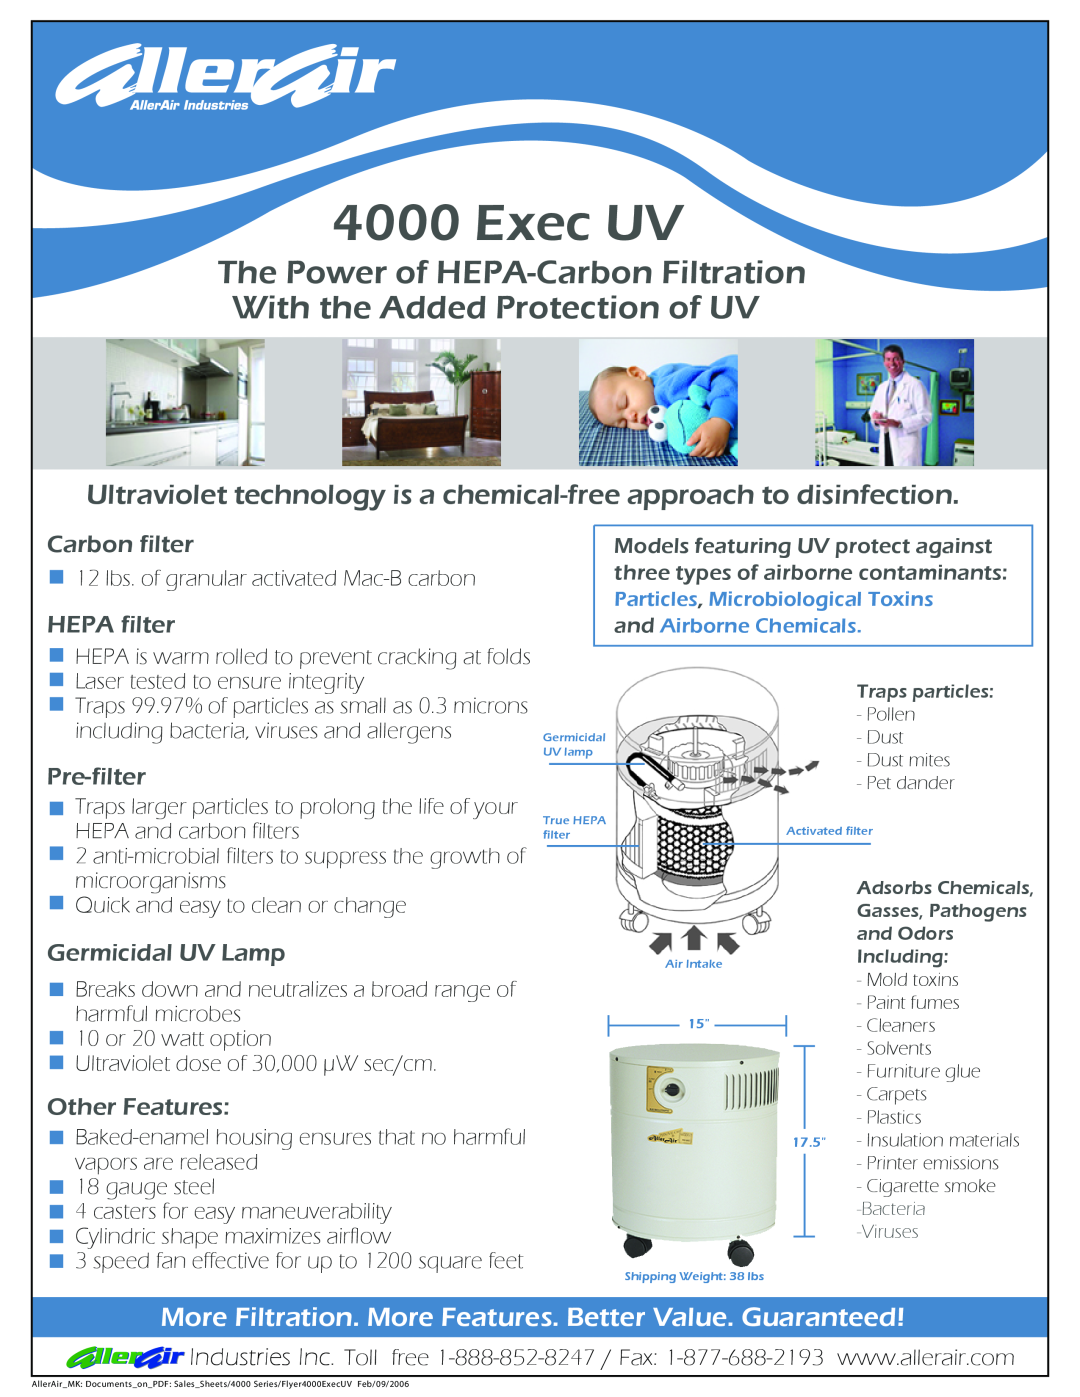 AllerAir 4000 Exec Uv manual The Power of HEPA-CarbonFiltration, With the Added Protection of UV, Exec UV, Carbon filter 